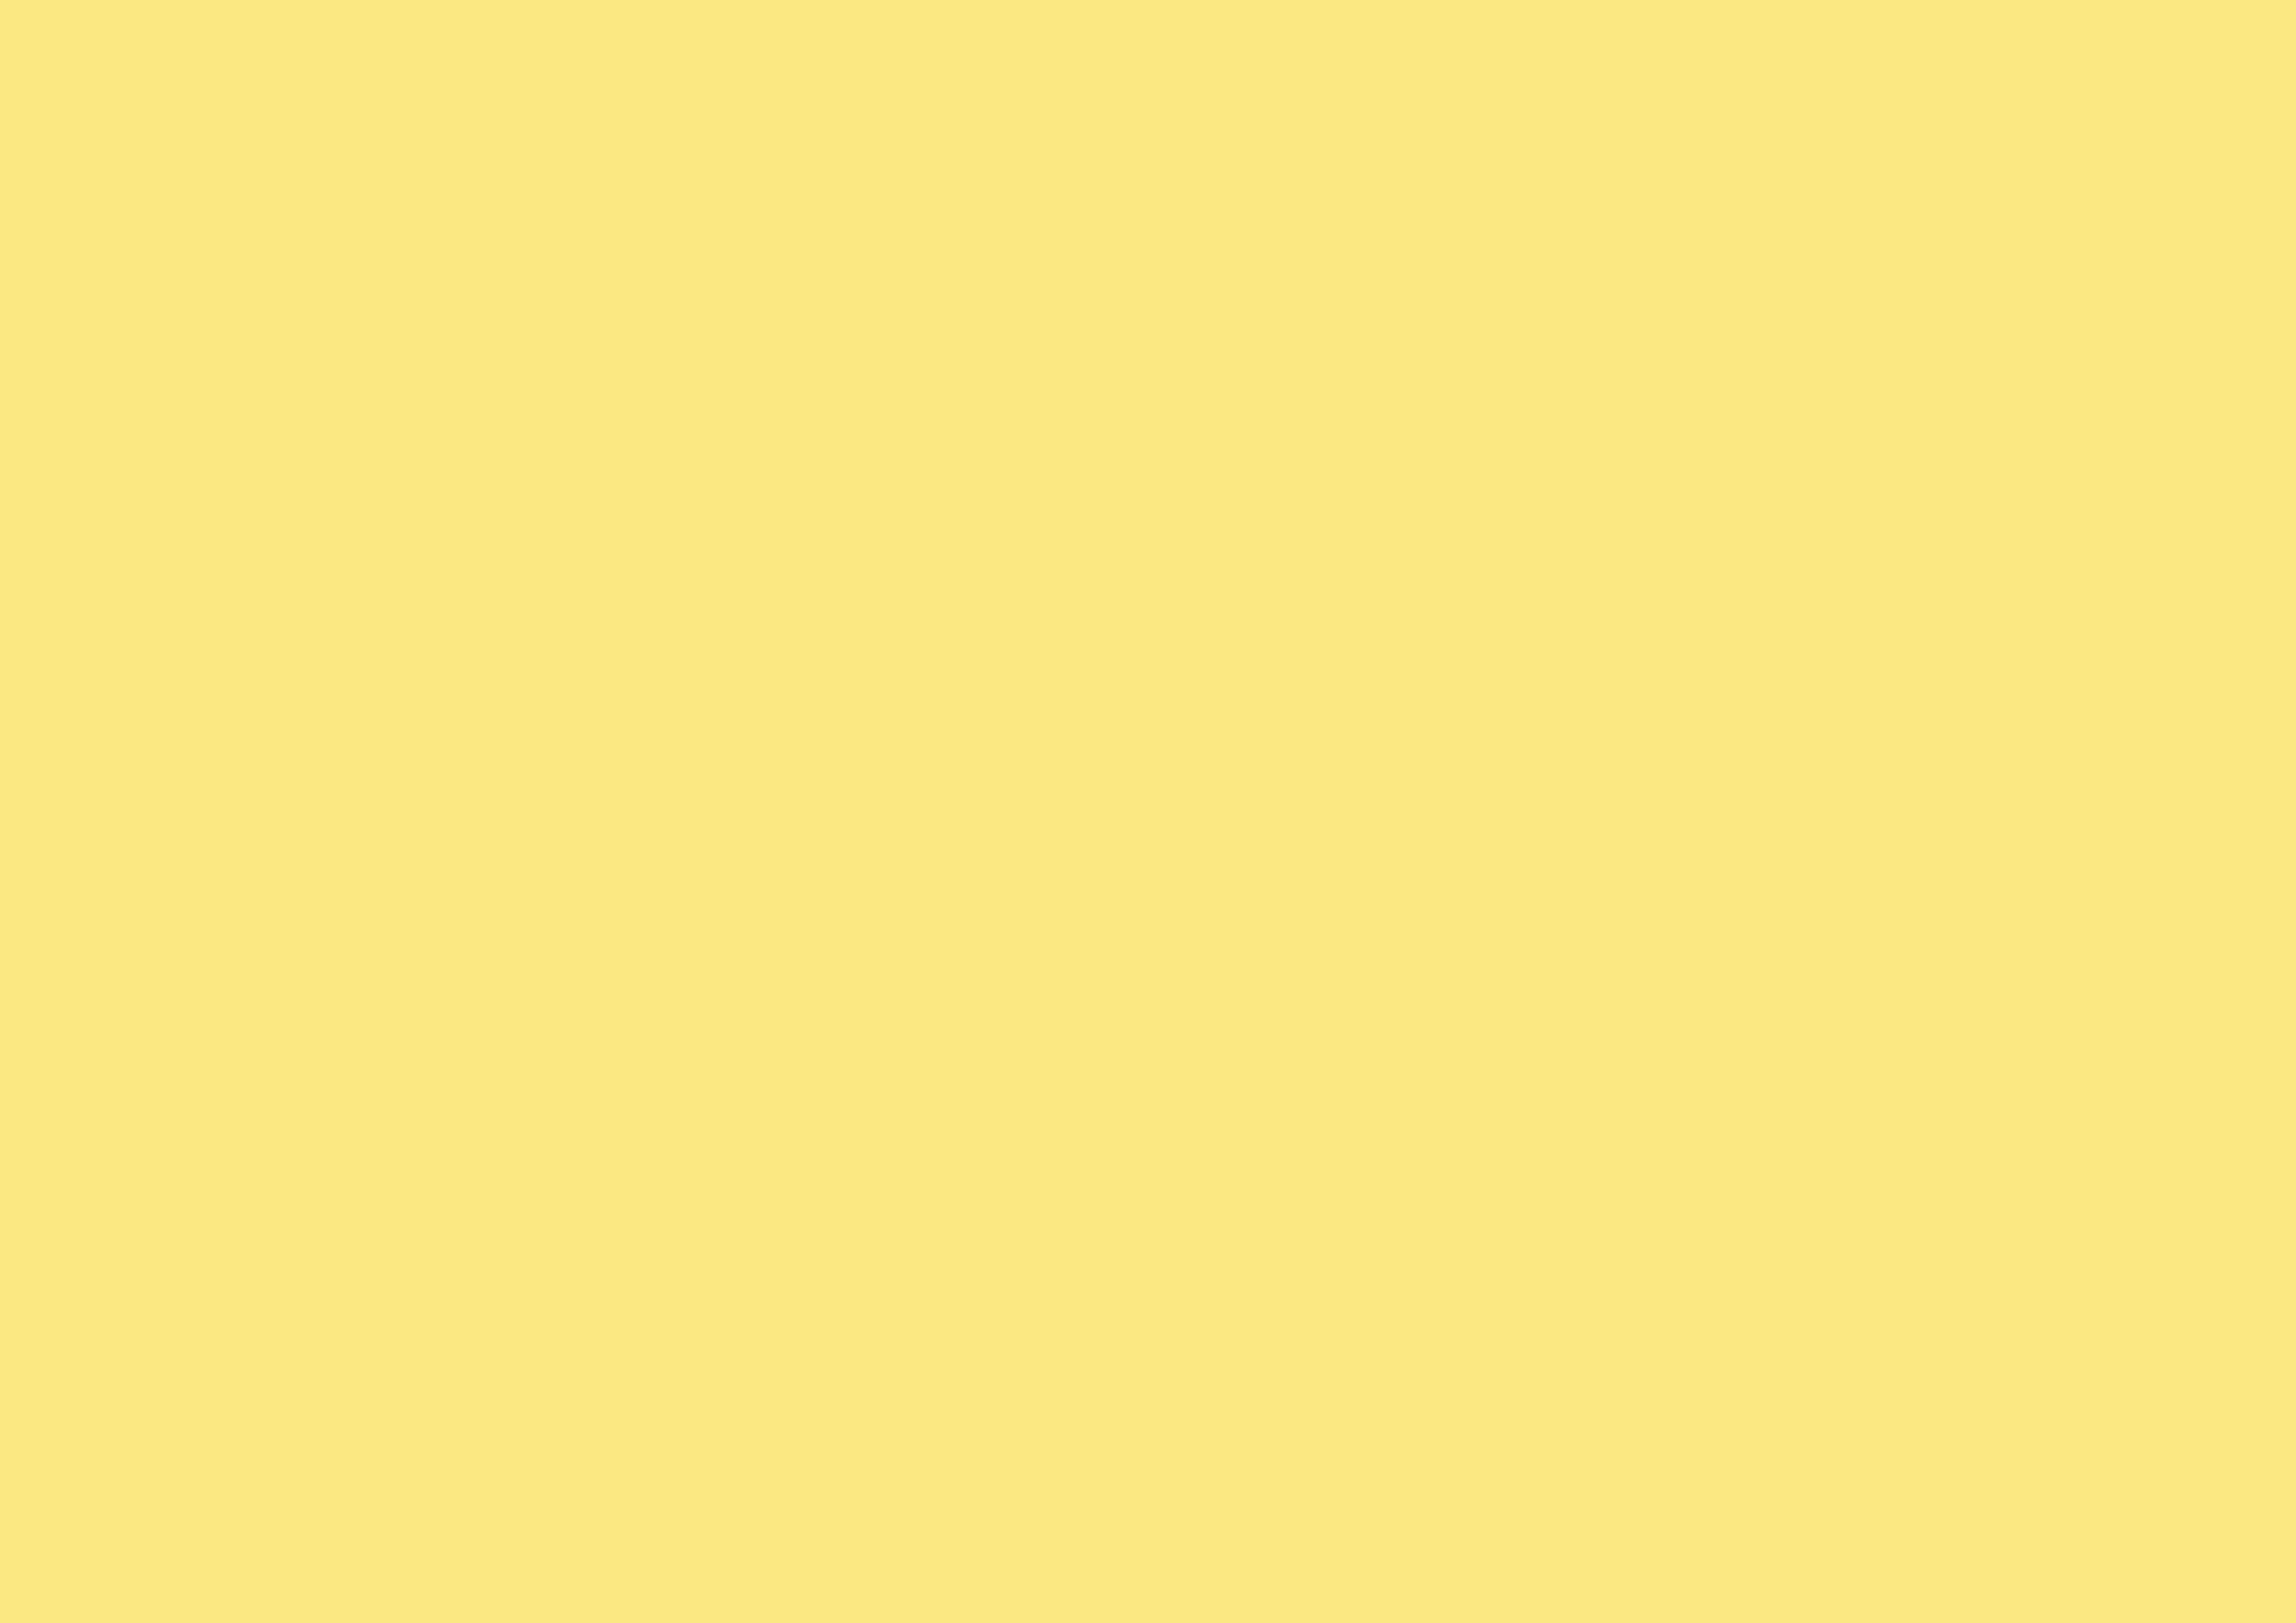 3508x2480 Yellow Crayola Solid Color Background